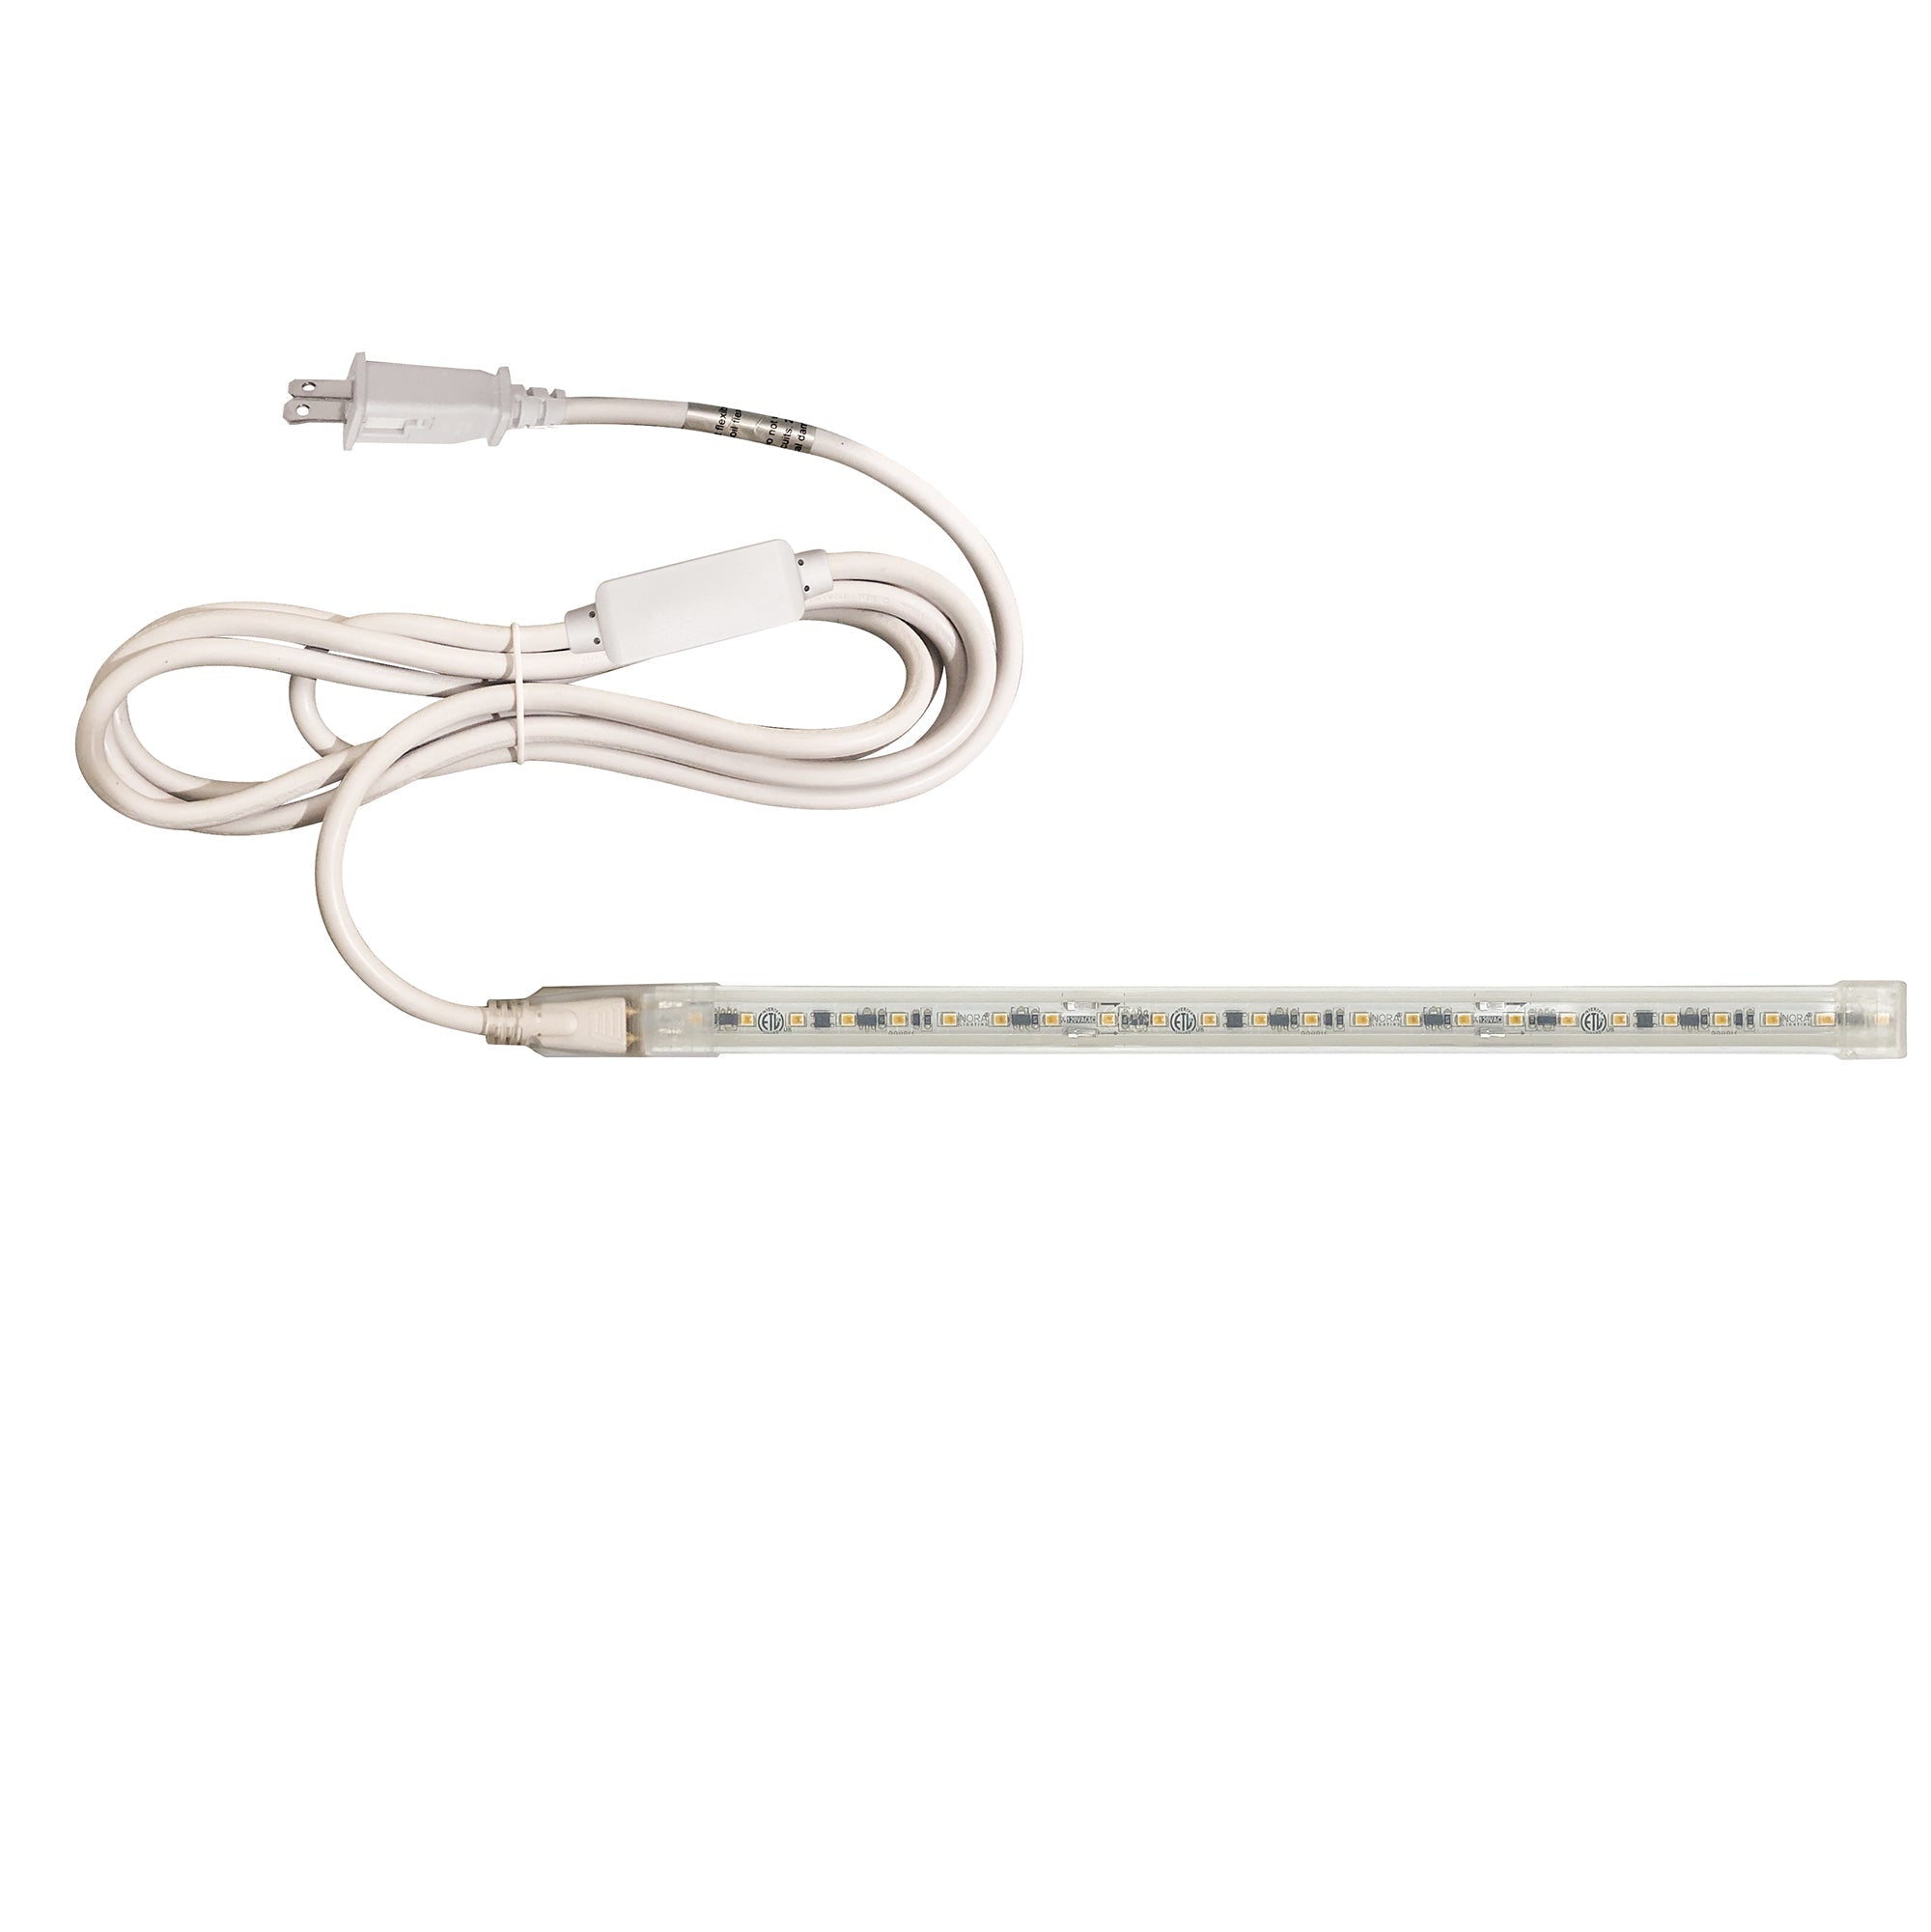 Nora Lighting NUTP13-W8-4-12-927/CPSP - Accent / Undercabinet - Custom Cut 8-ft, 4-in 120V Continuous LED Tape Light, 330lm / 3.6W per foot, 2700K, w/ Mounting Clips and 8' Cord & Plug w/ Surge Protector